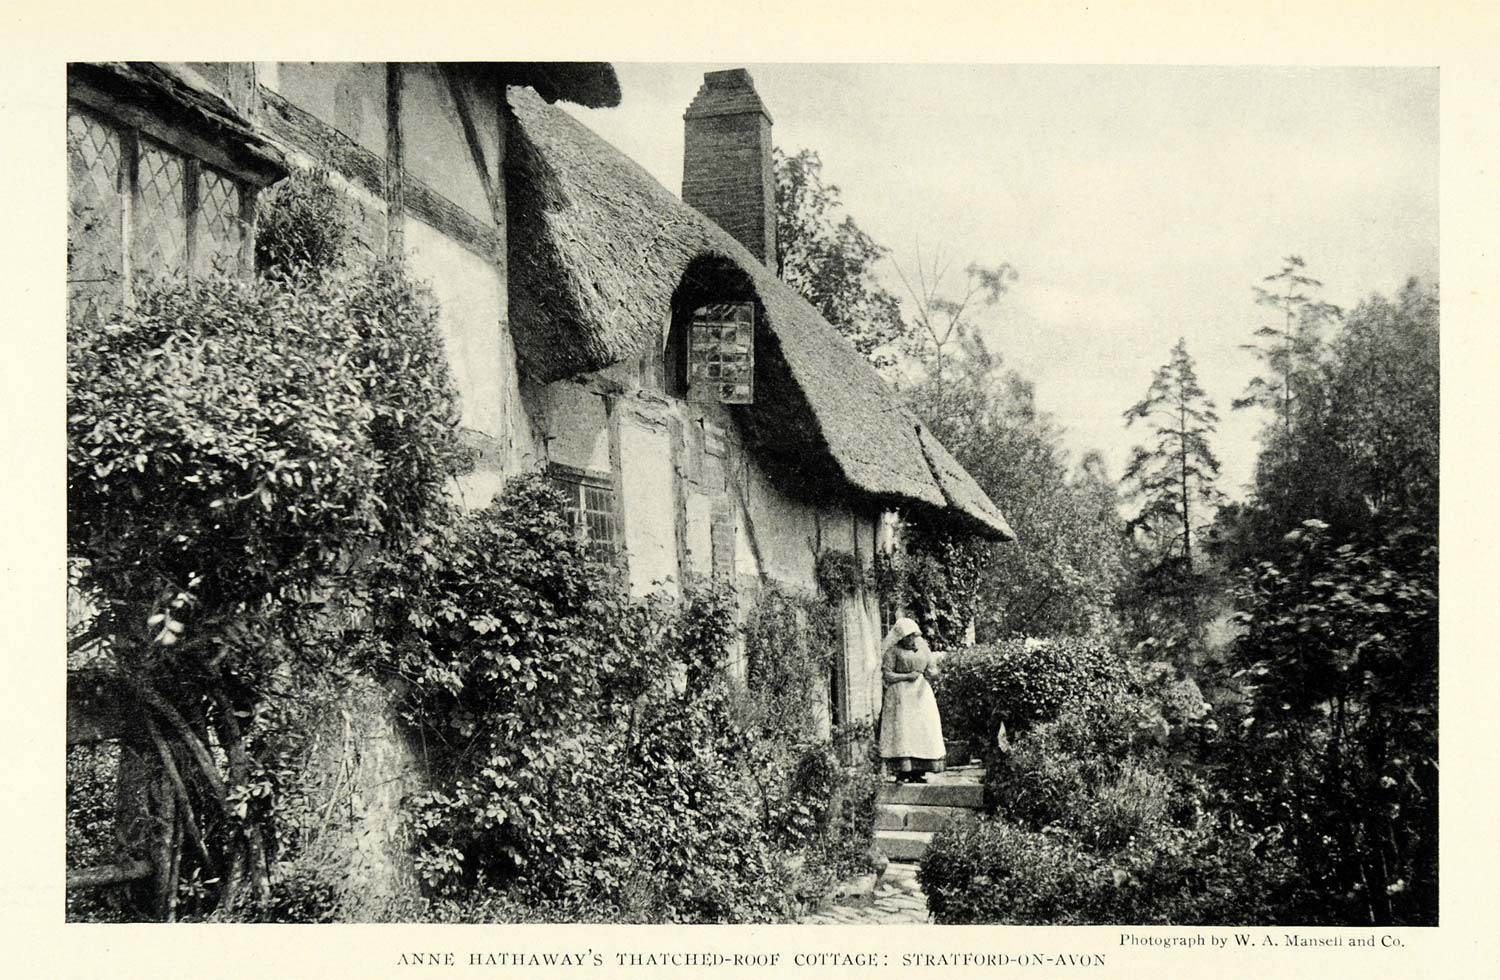 1922 Print Anne Hathaway Thatched Roof Cottage Home Stratford on Avon NGM2